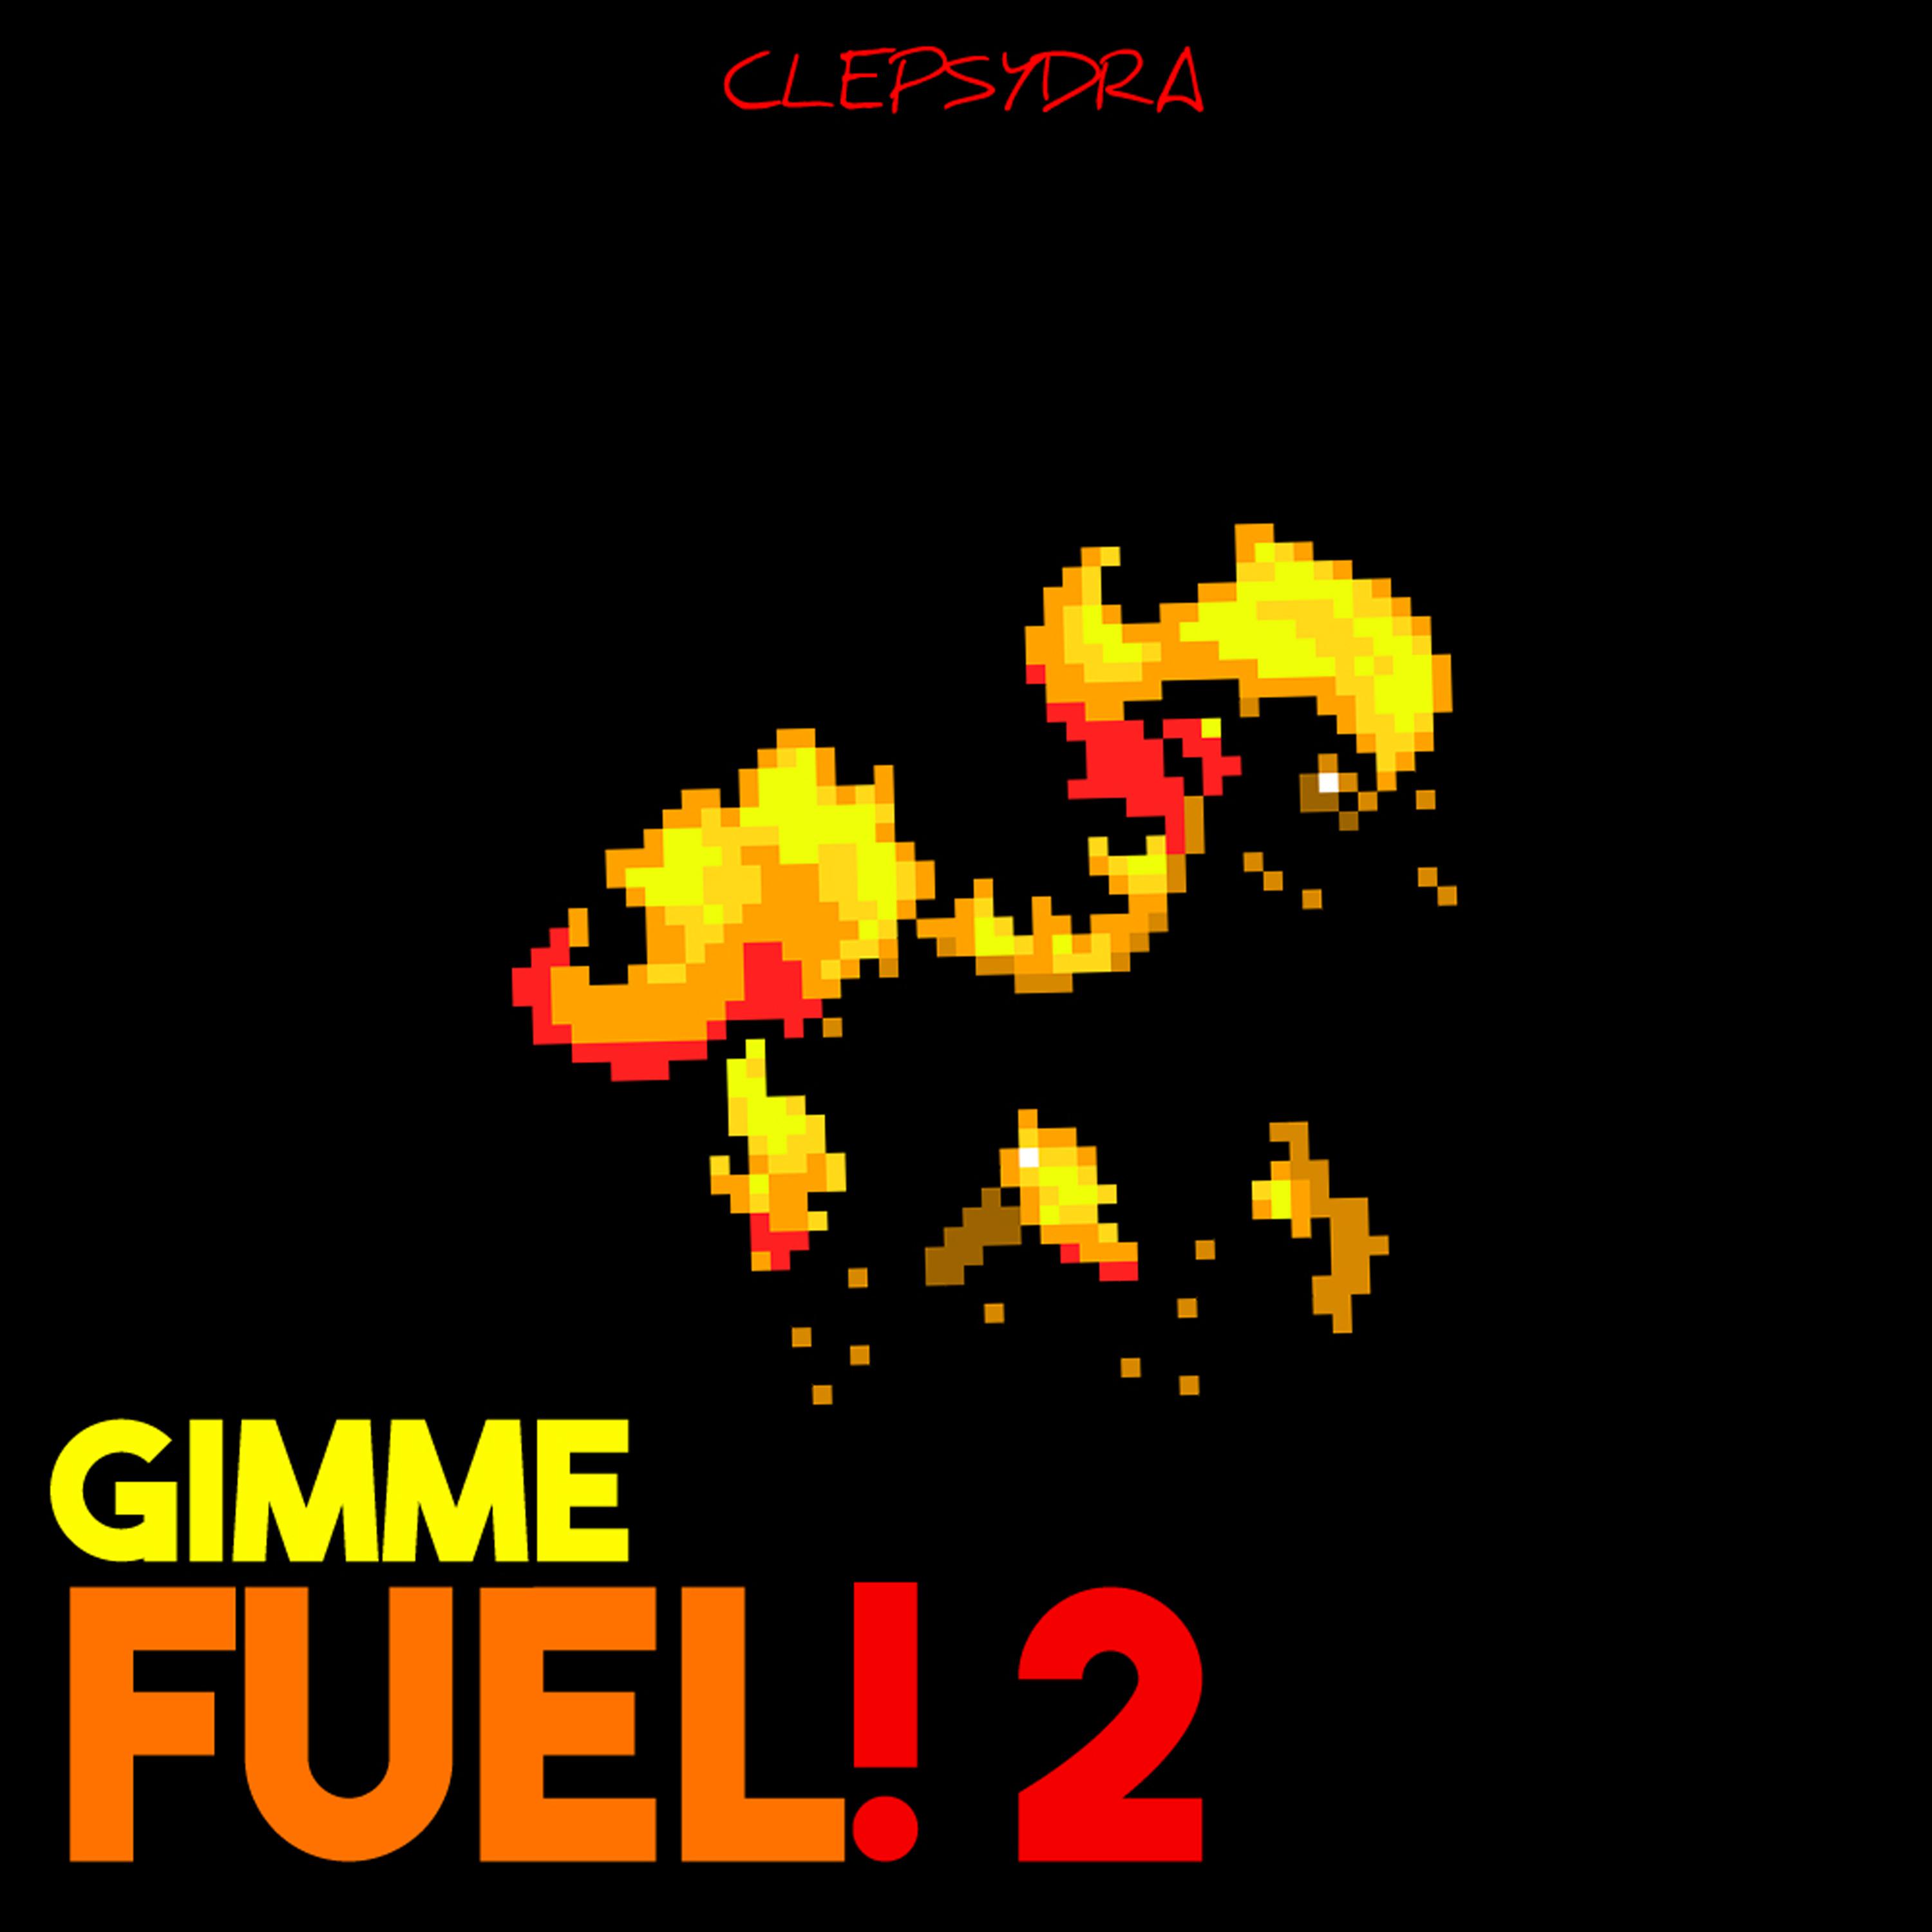 Gimme Fuel! 2